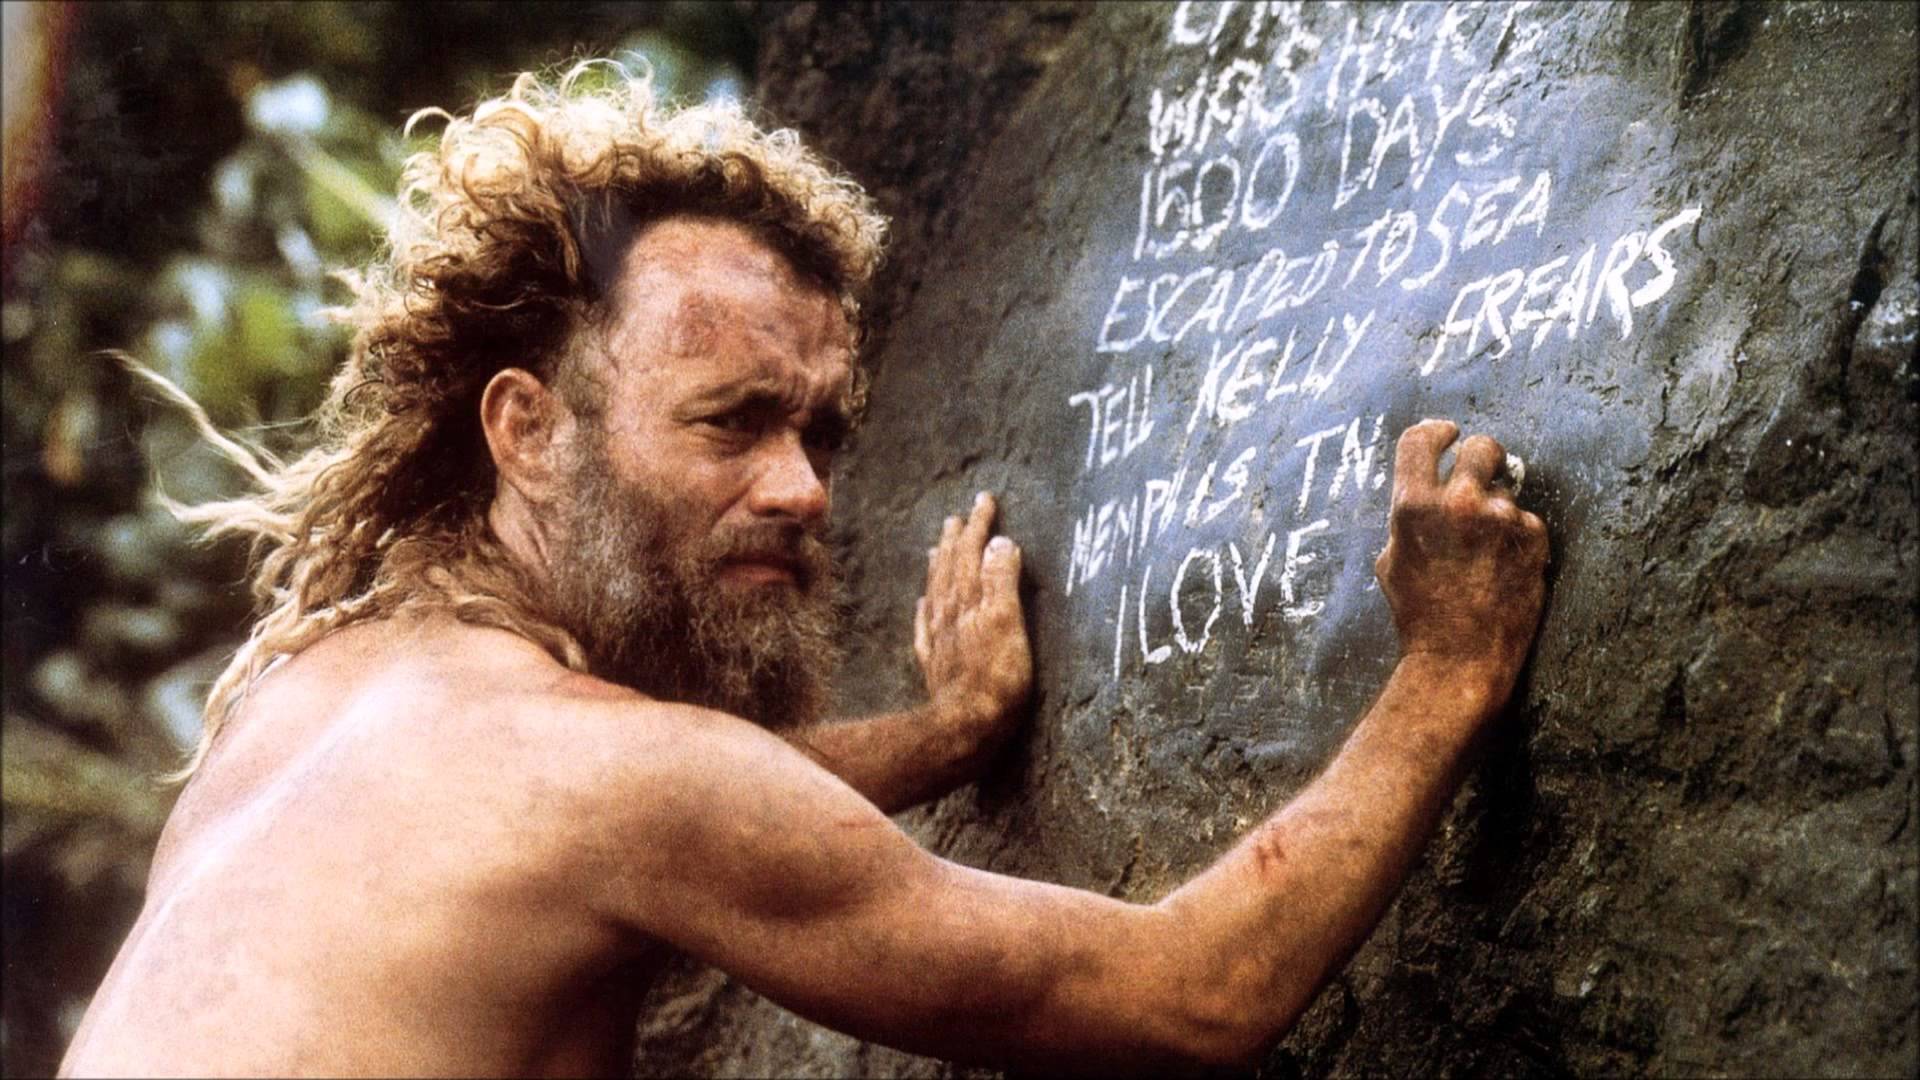 18 Years Later: Why the CAST AWAY Script Works - ScreenCraft